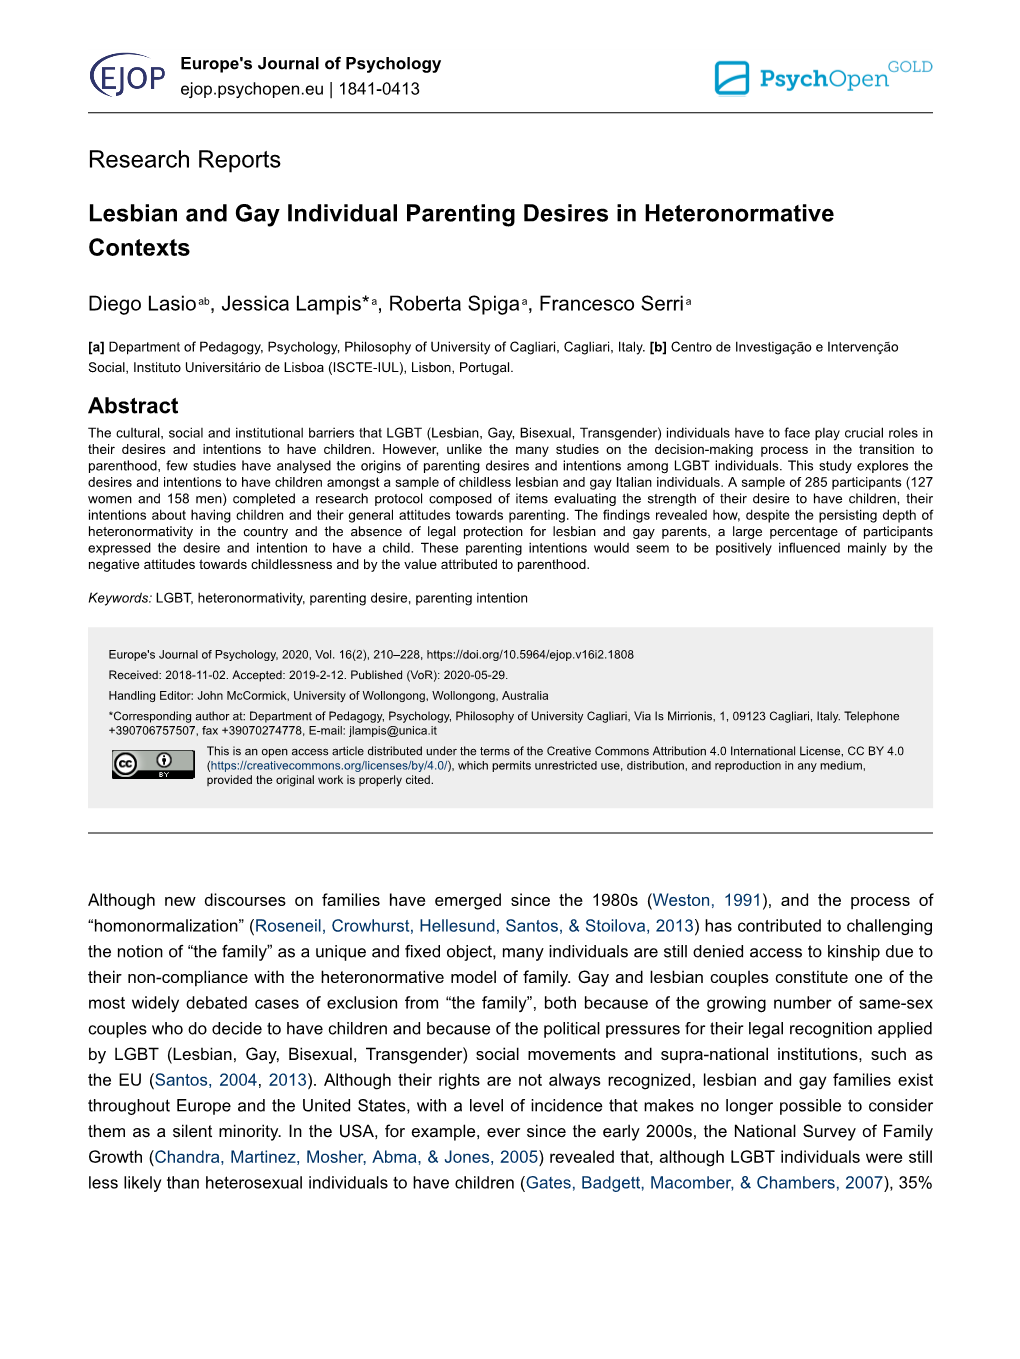 Lesbian and Gay Individual Parenting Desires in Heteronormative Contexts